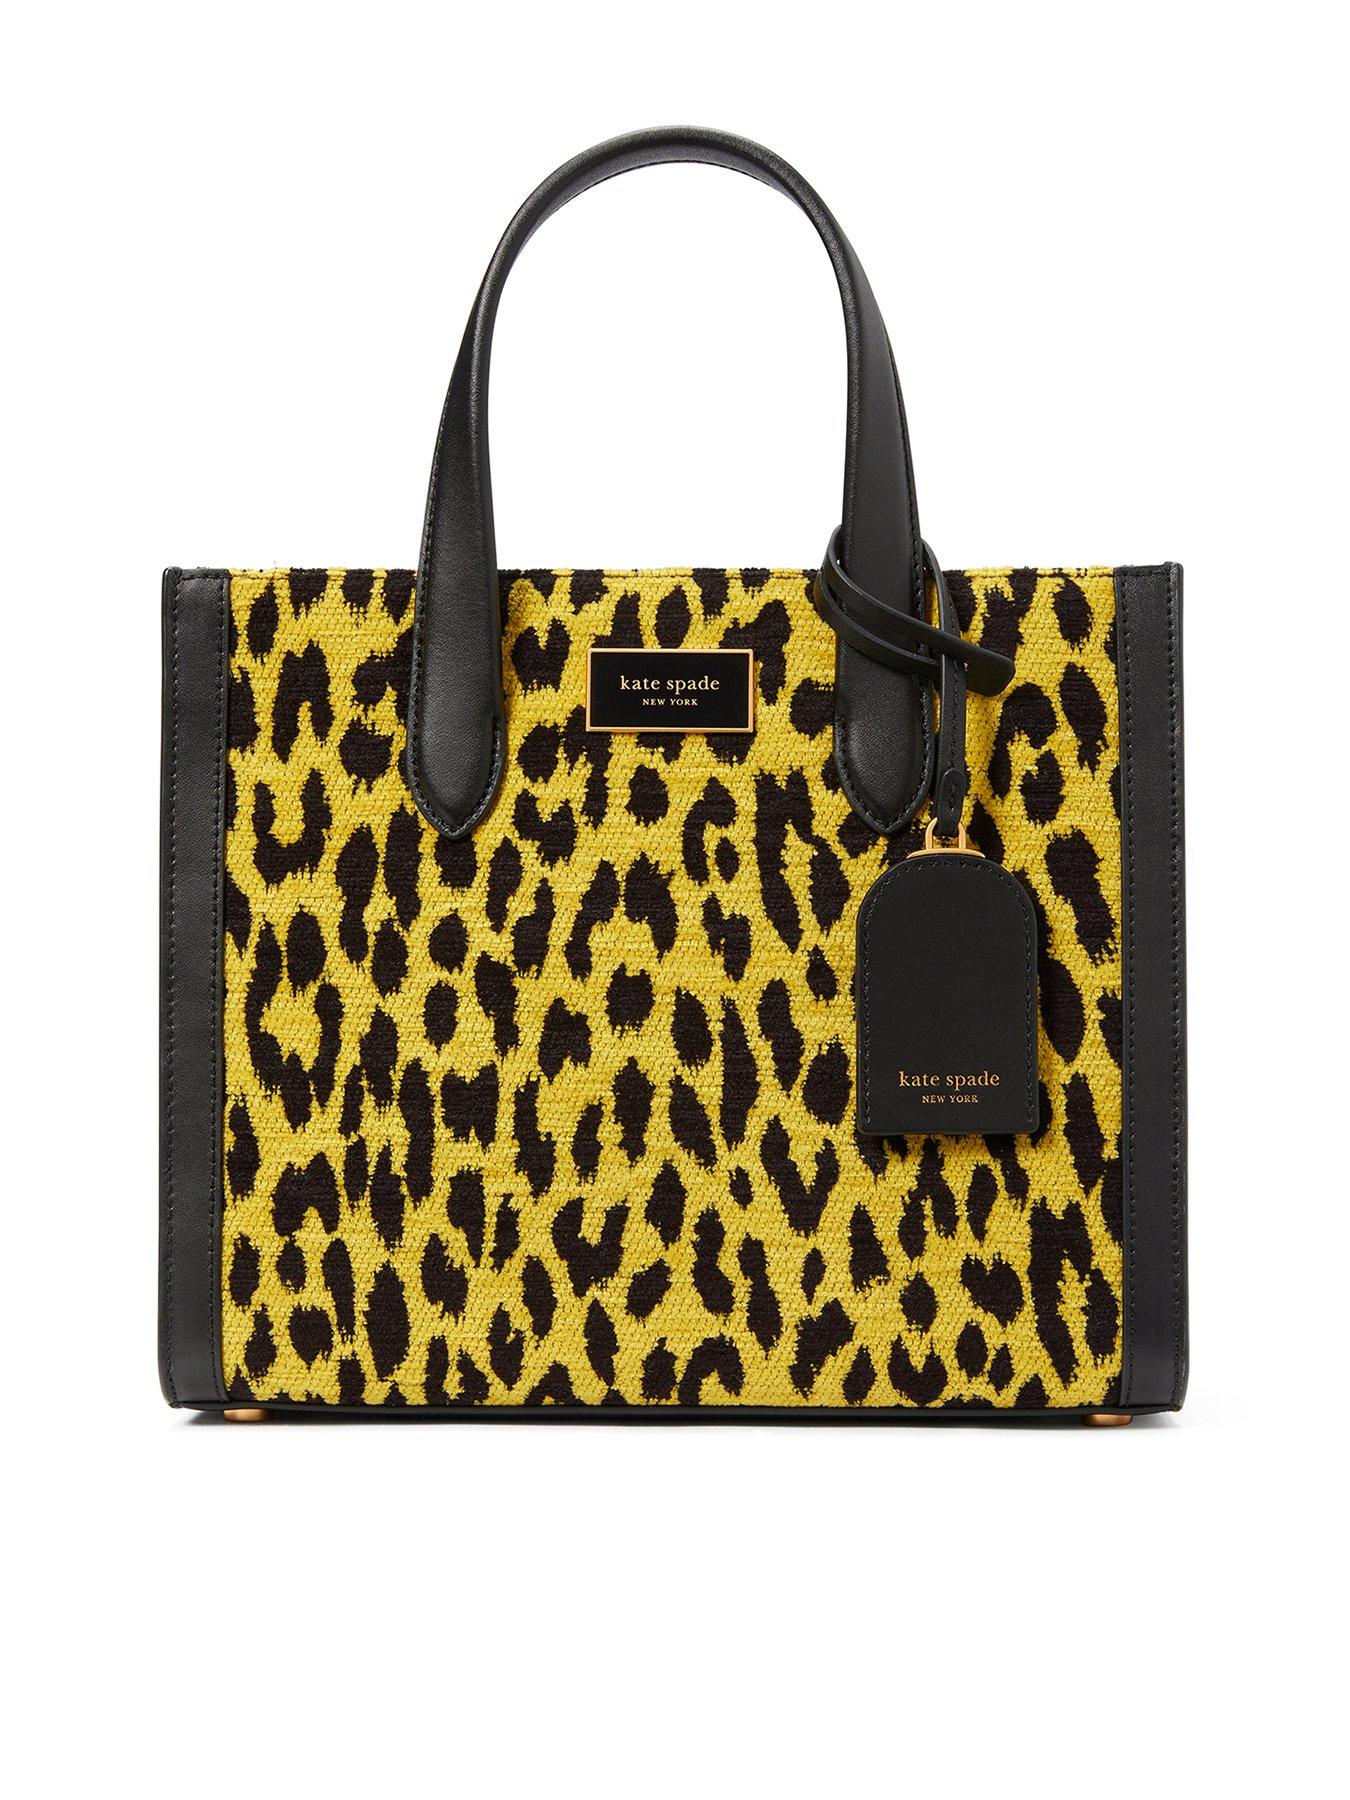 Satchel Bags for Women | Kate Spade Outlet